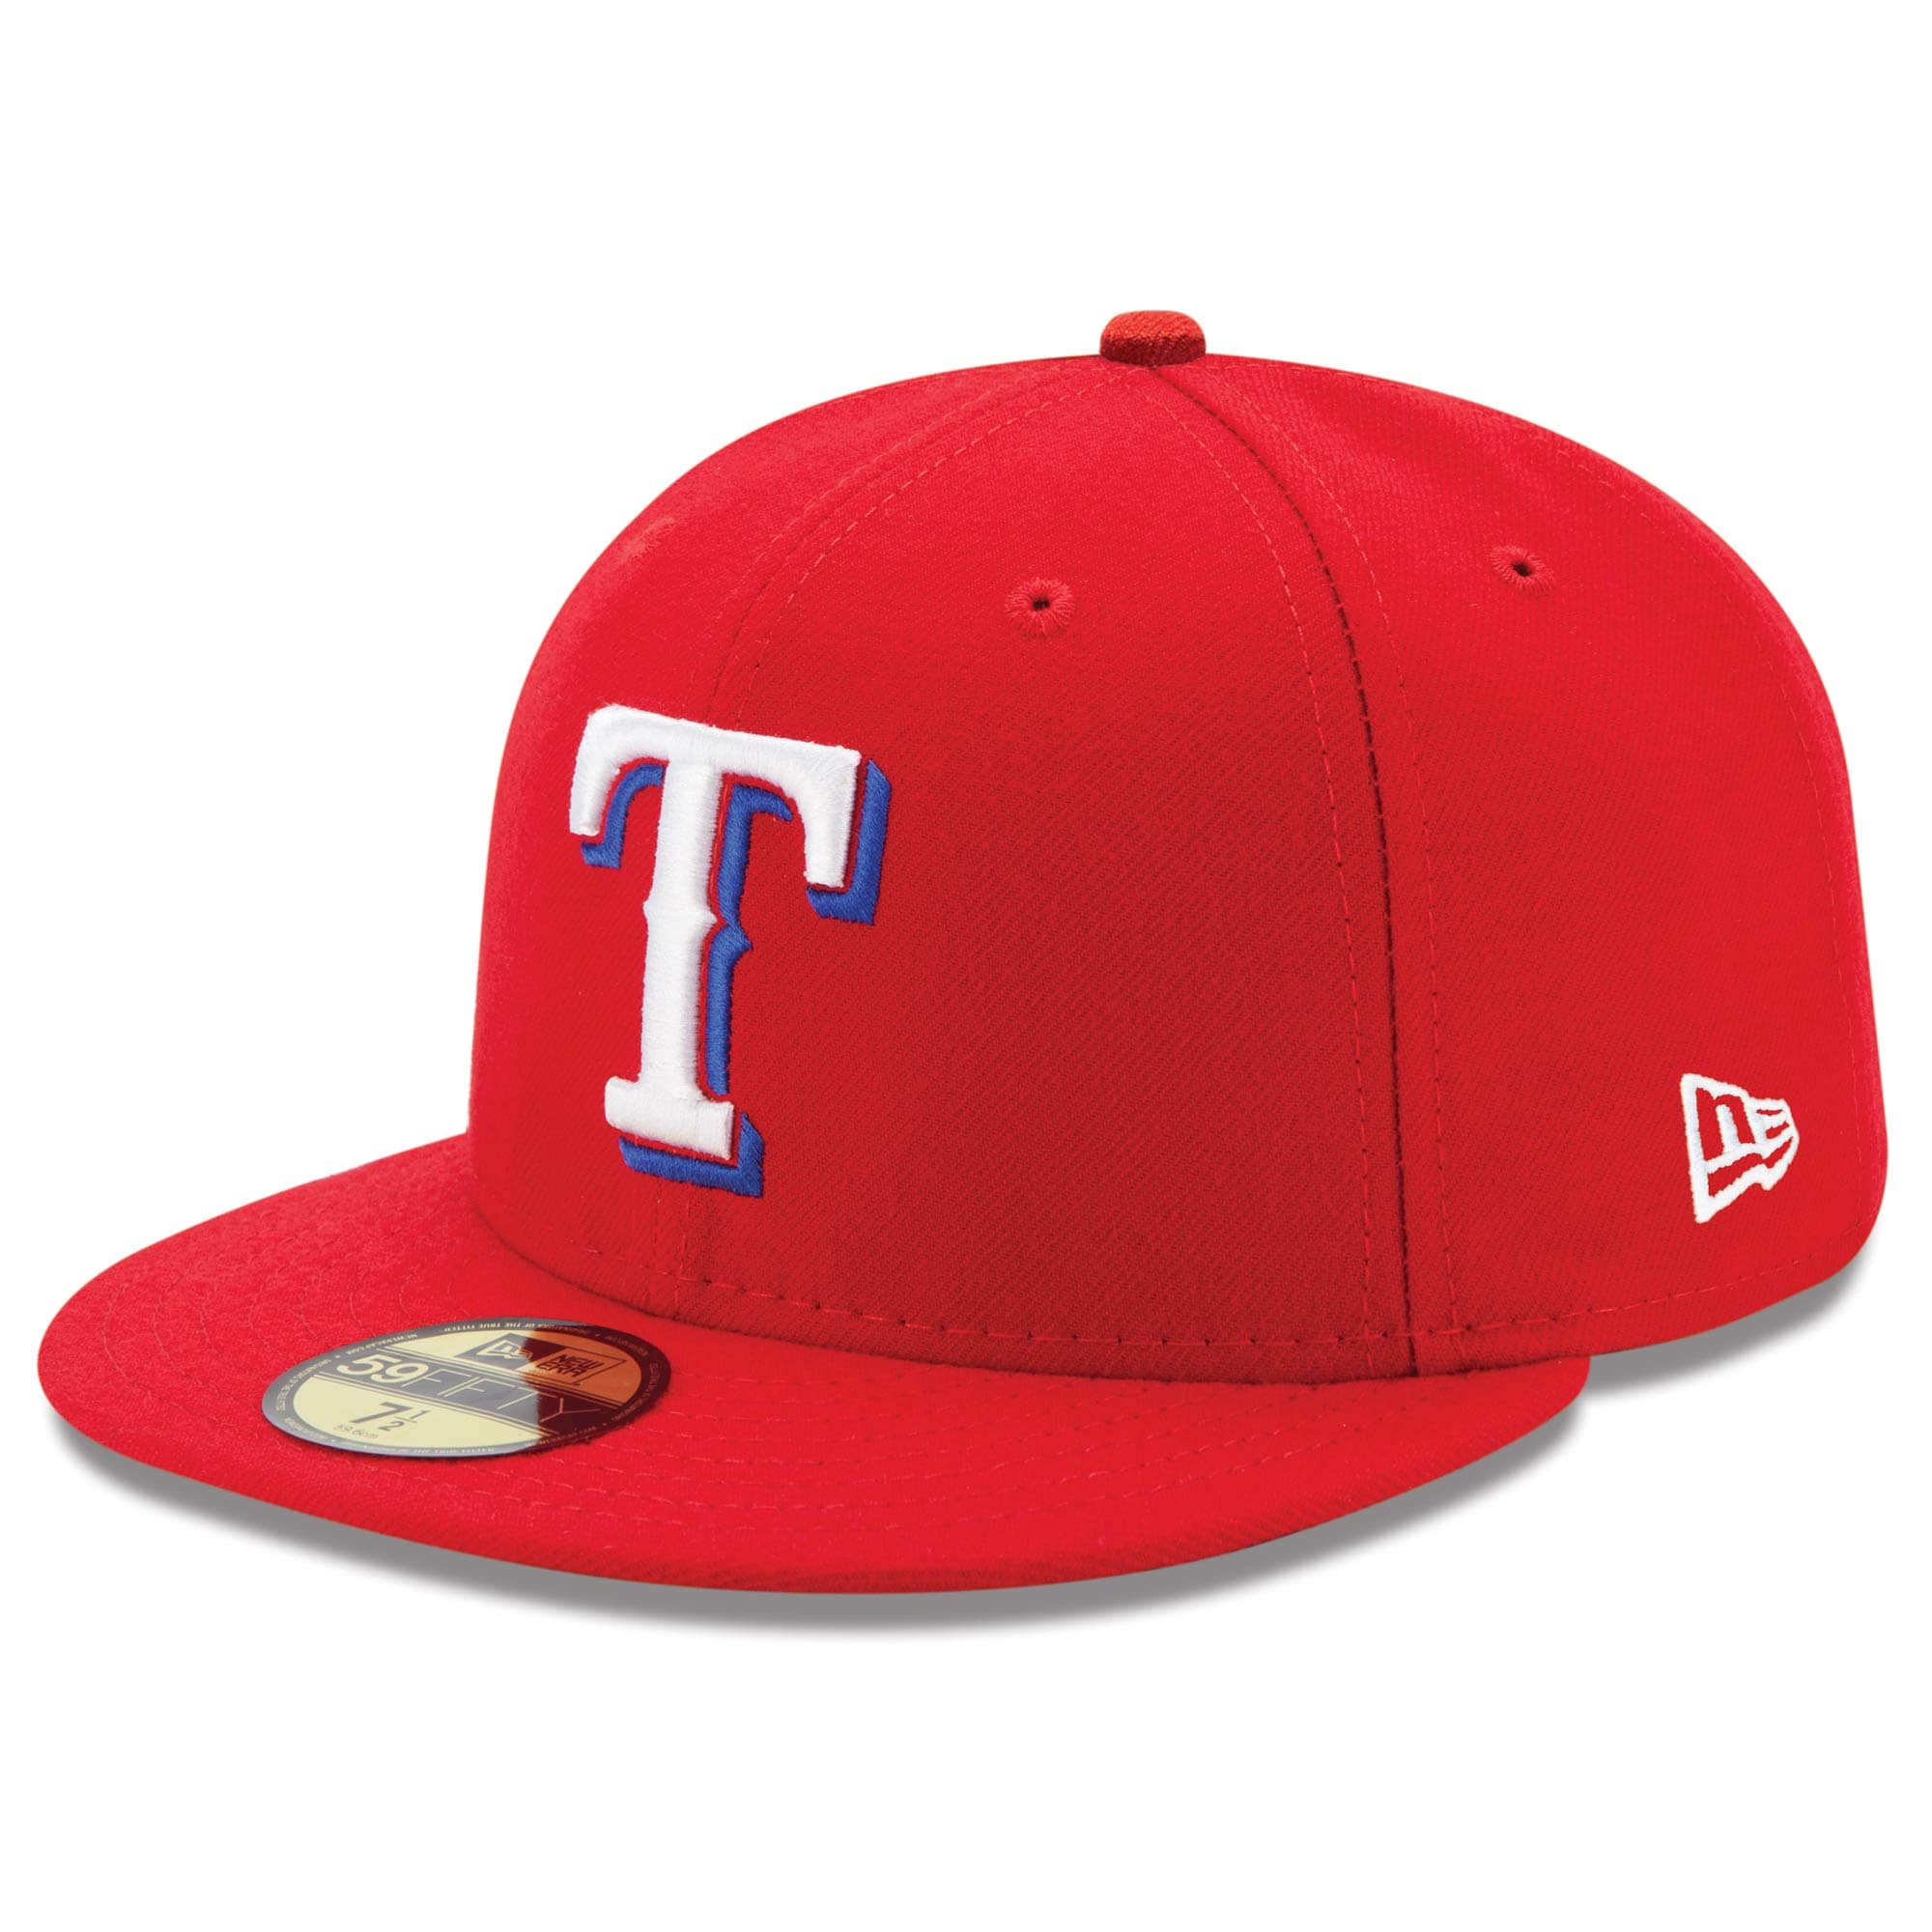 Men's New Era Red Texas Rangers Alternate Authentic Collection On-Field 59FIFTY Fitted Hat - image 1 of 4